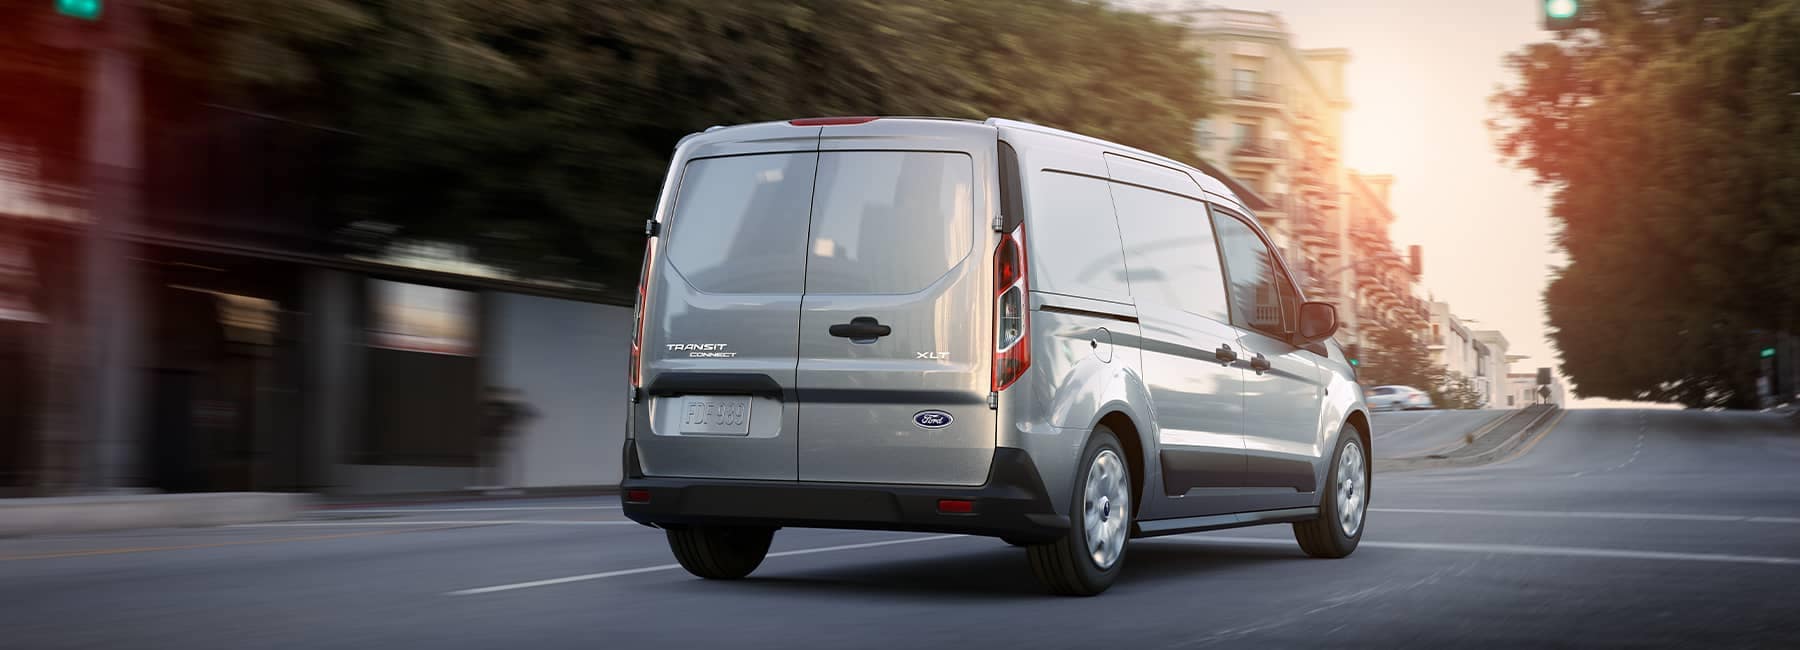 White 2021 Ford Transit driving away on a suburban street